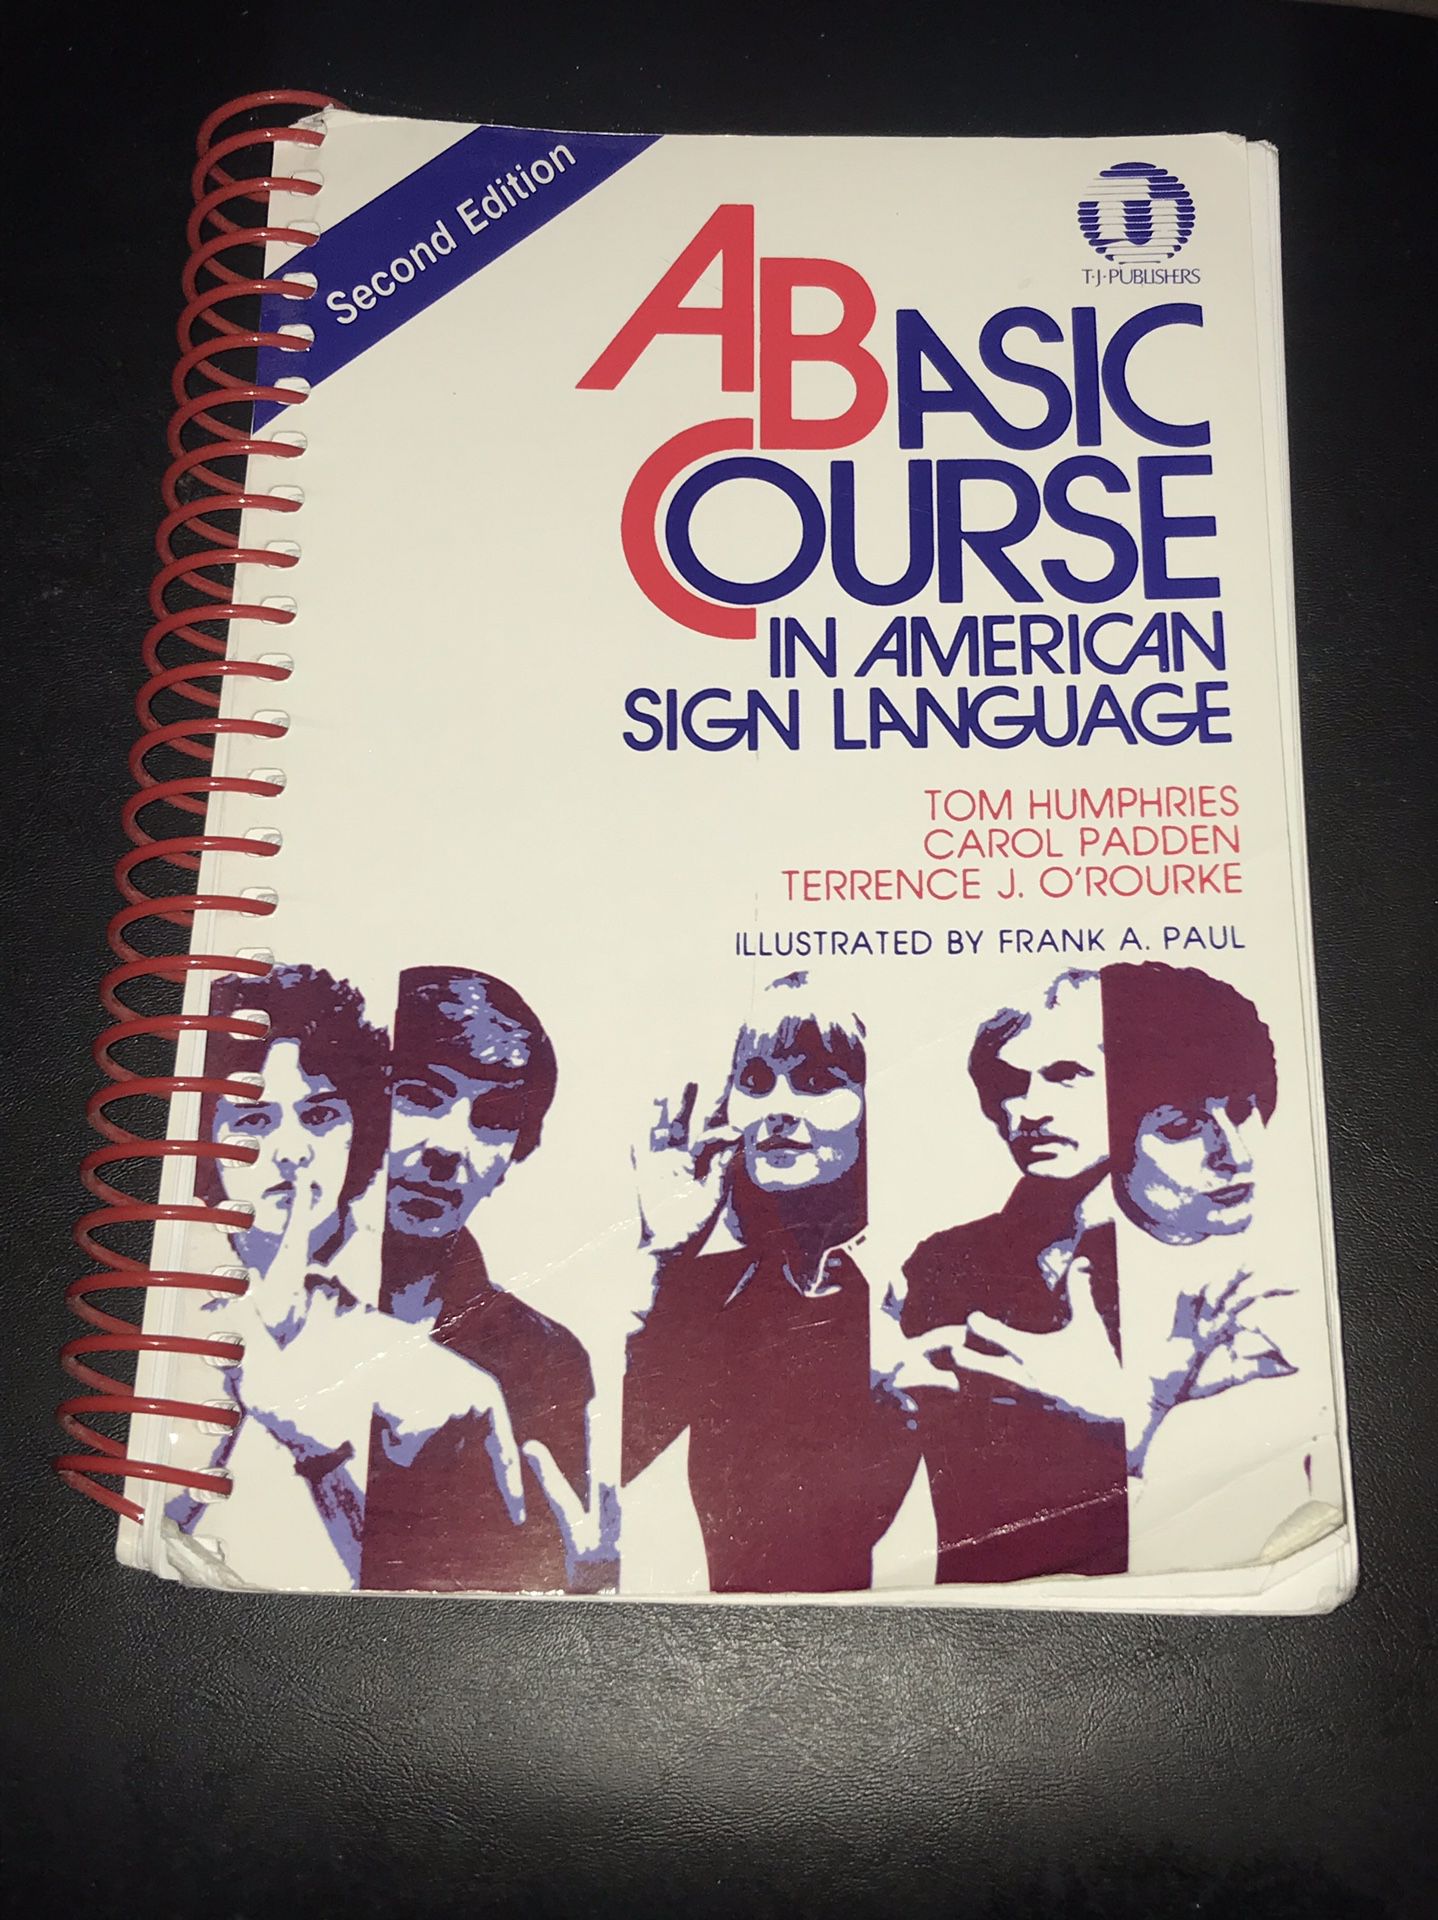 A Basic Course in ASL (American Sign Language) Second Edition